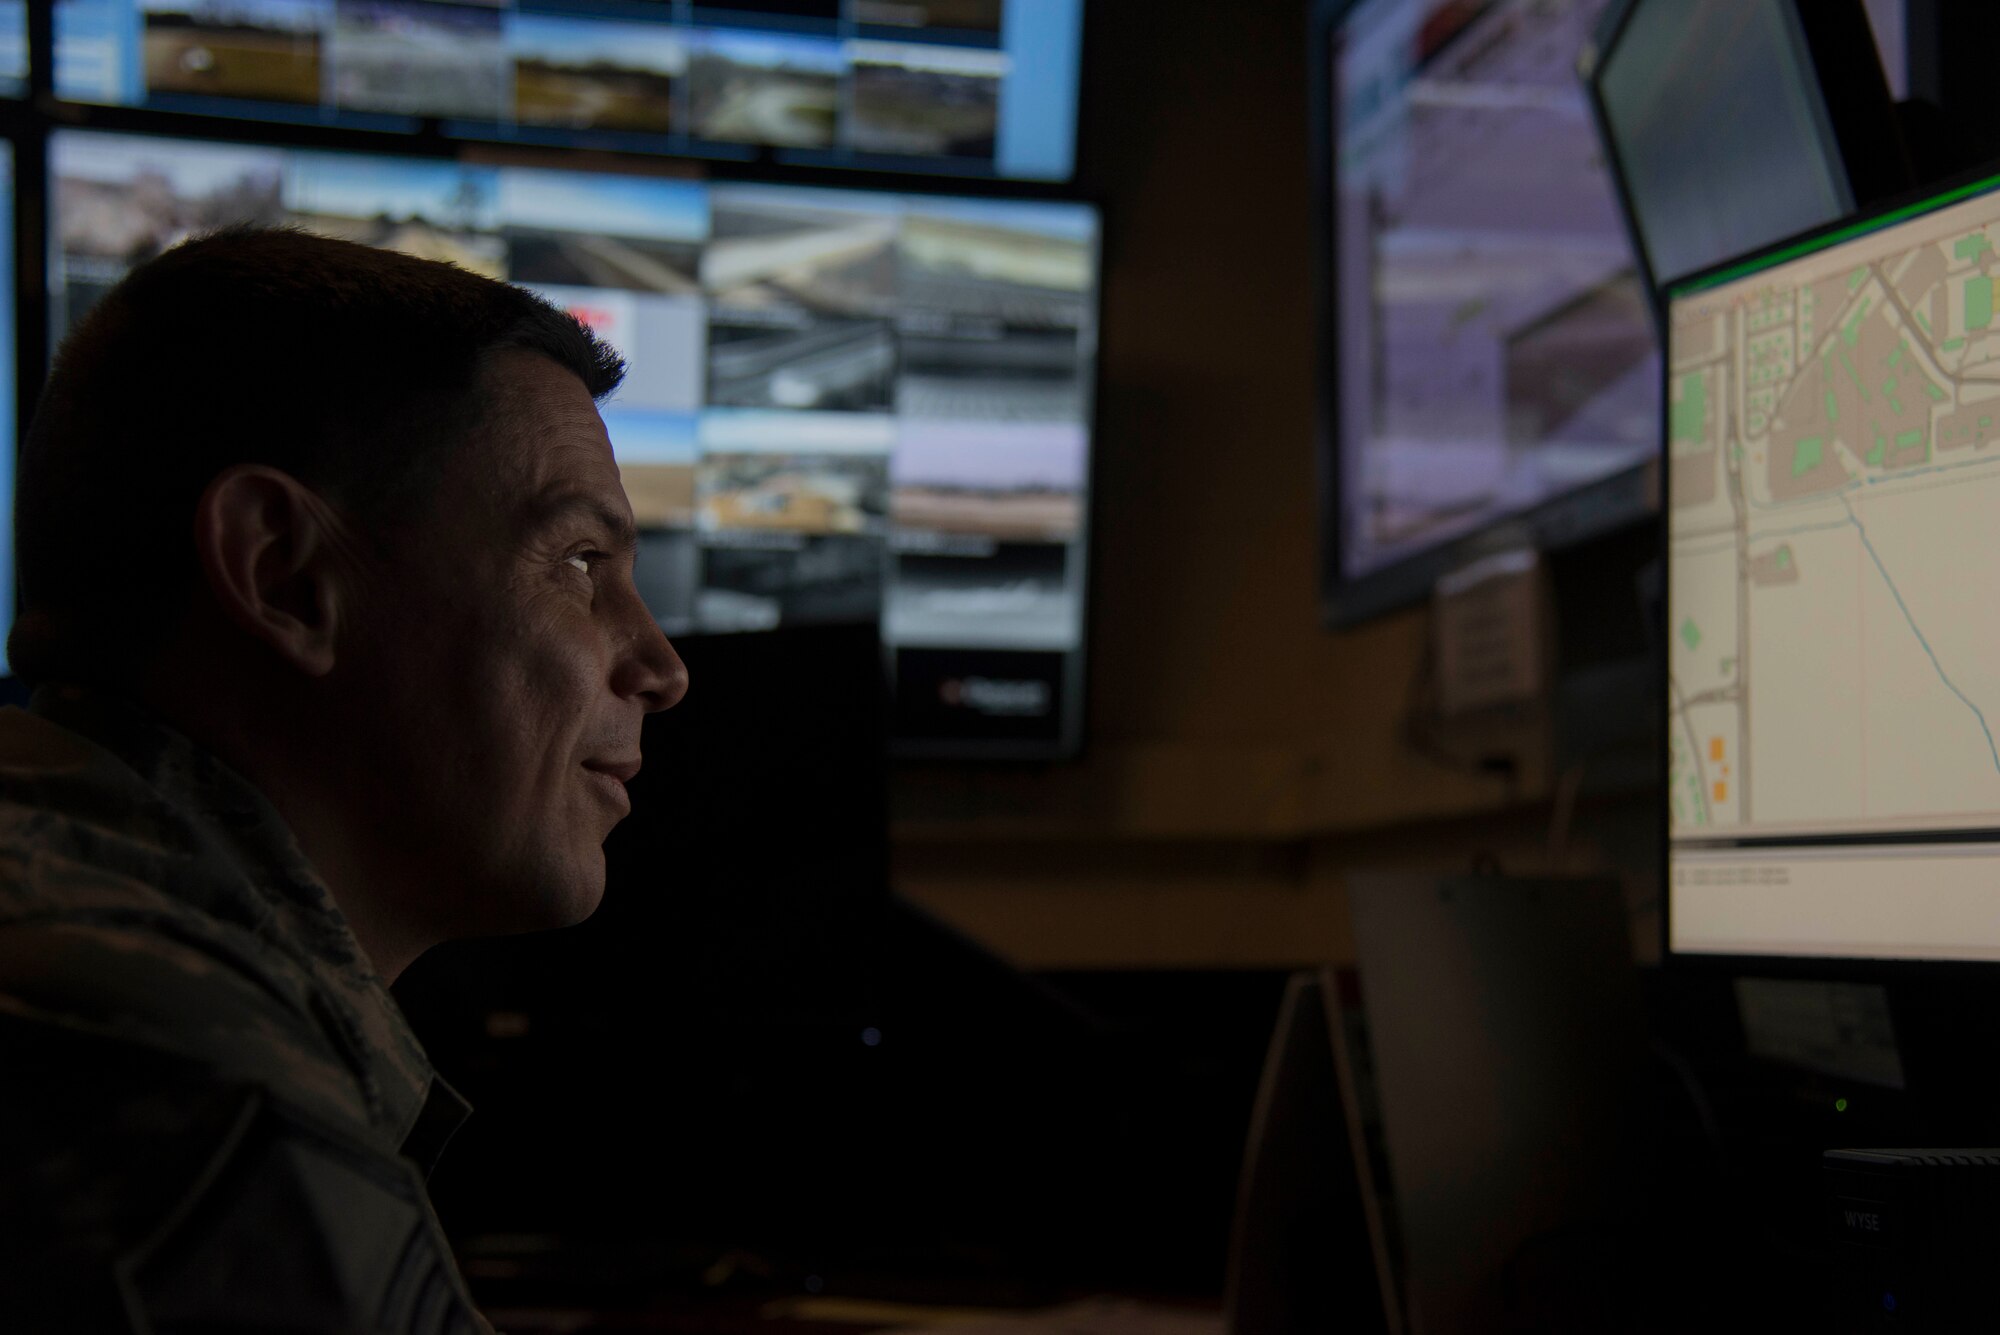 Master Sgt. Aron Luna, 375th Security Forces Squadron logistics superintendent, surveys a map of the base on Feb. 25, 2019 at Scott Air Force Base, Illinois. Once the office space is converted to the Emergency Communications Center, Fire Fighters and Security Forces members, will work side by side in the Emergency Communications Center. (U.S. Air Force Photo by Airman 1st Class Kristin Savage)